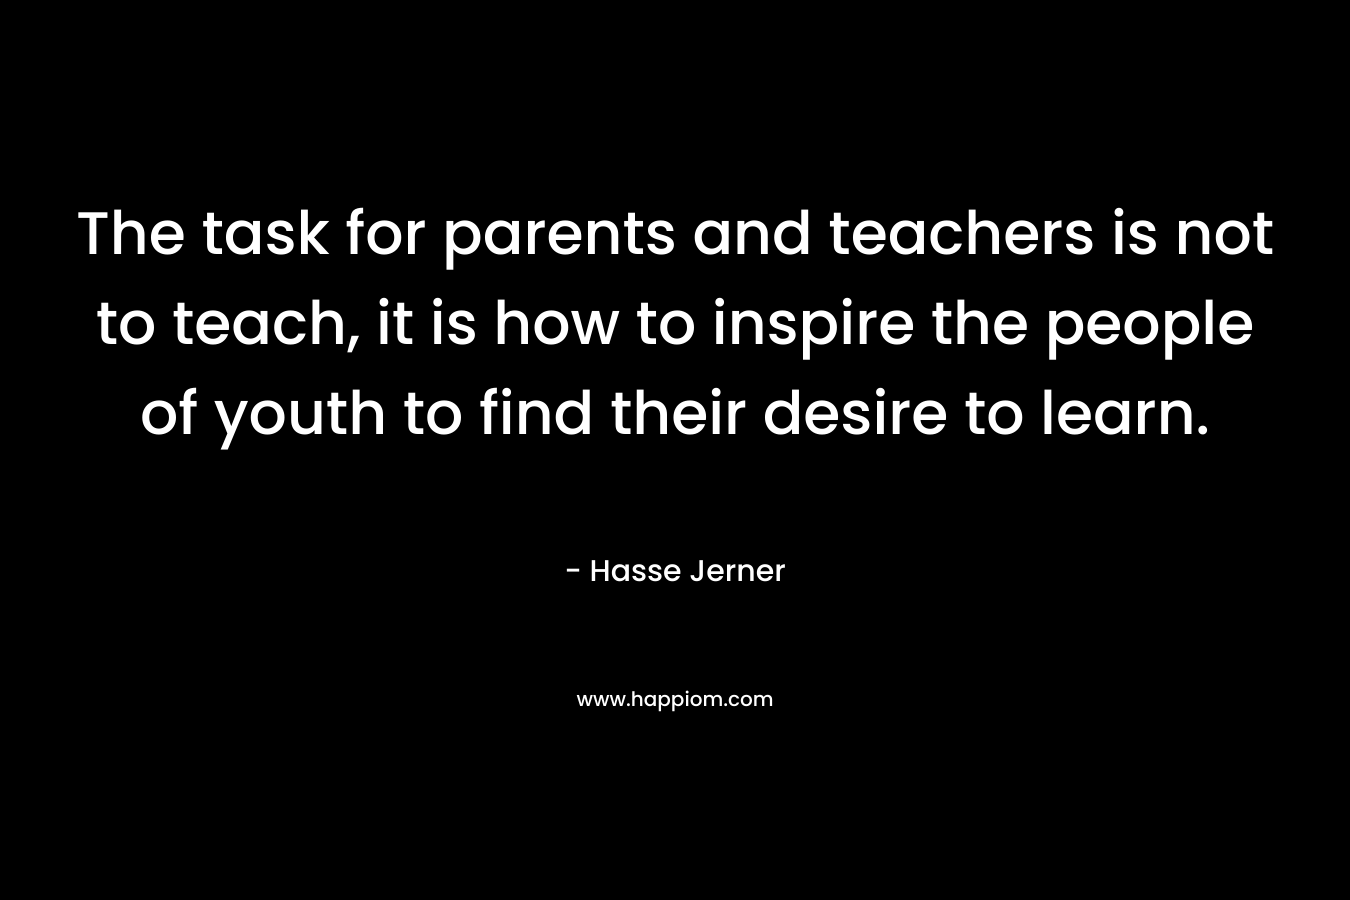 The task for parents and teachers is not to teach, it is how to inspire the people of youth to find their desire to learn.